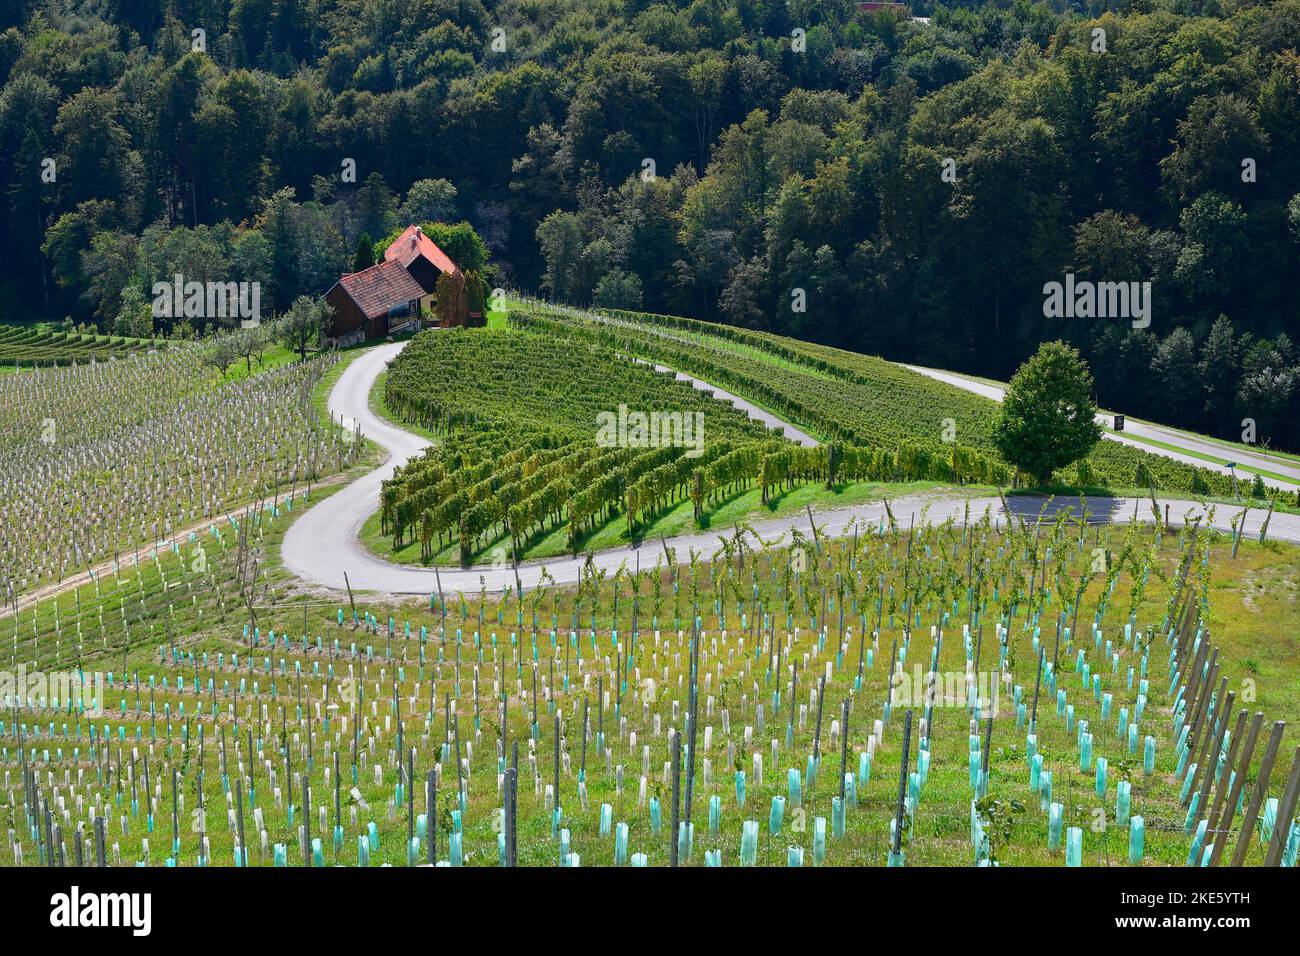 Slovenia, landscape with vineyards and the so-called Herzerlstrasse, a popular destination right on the Austrian-Slovenian border Stock Photo